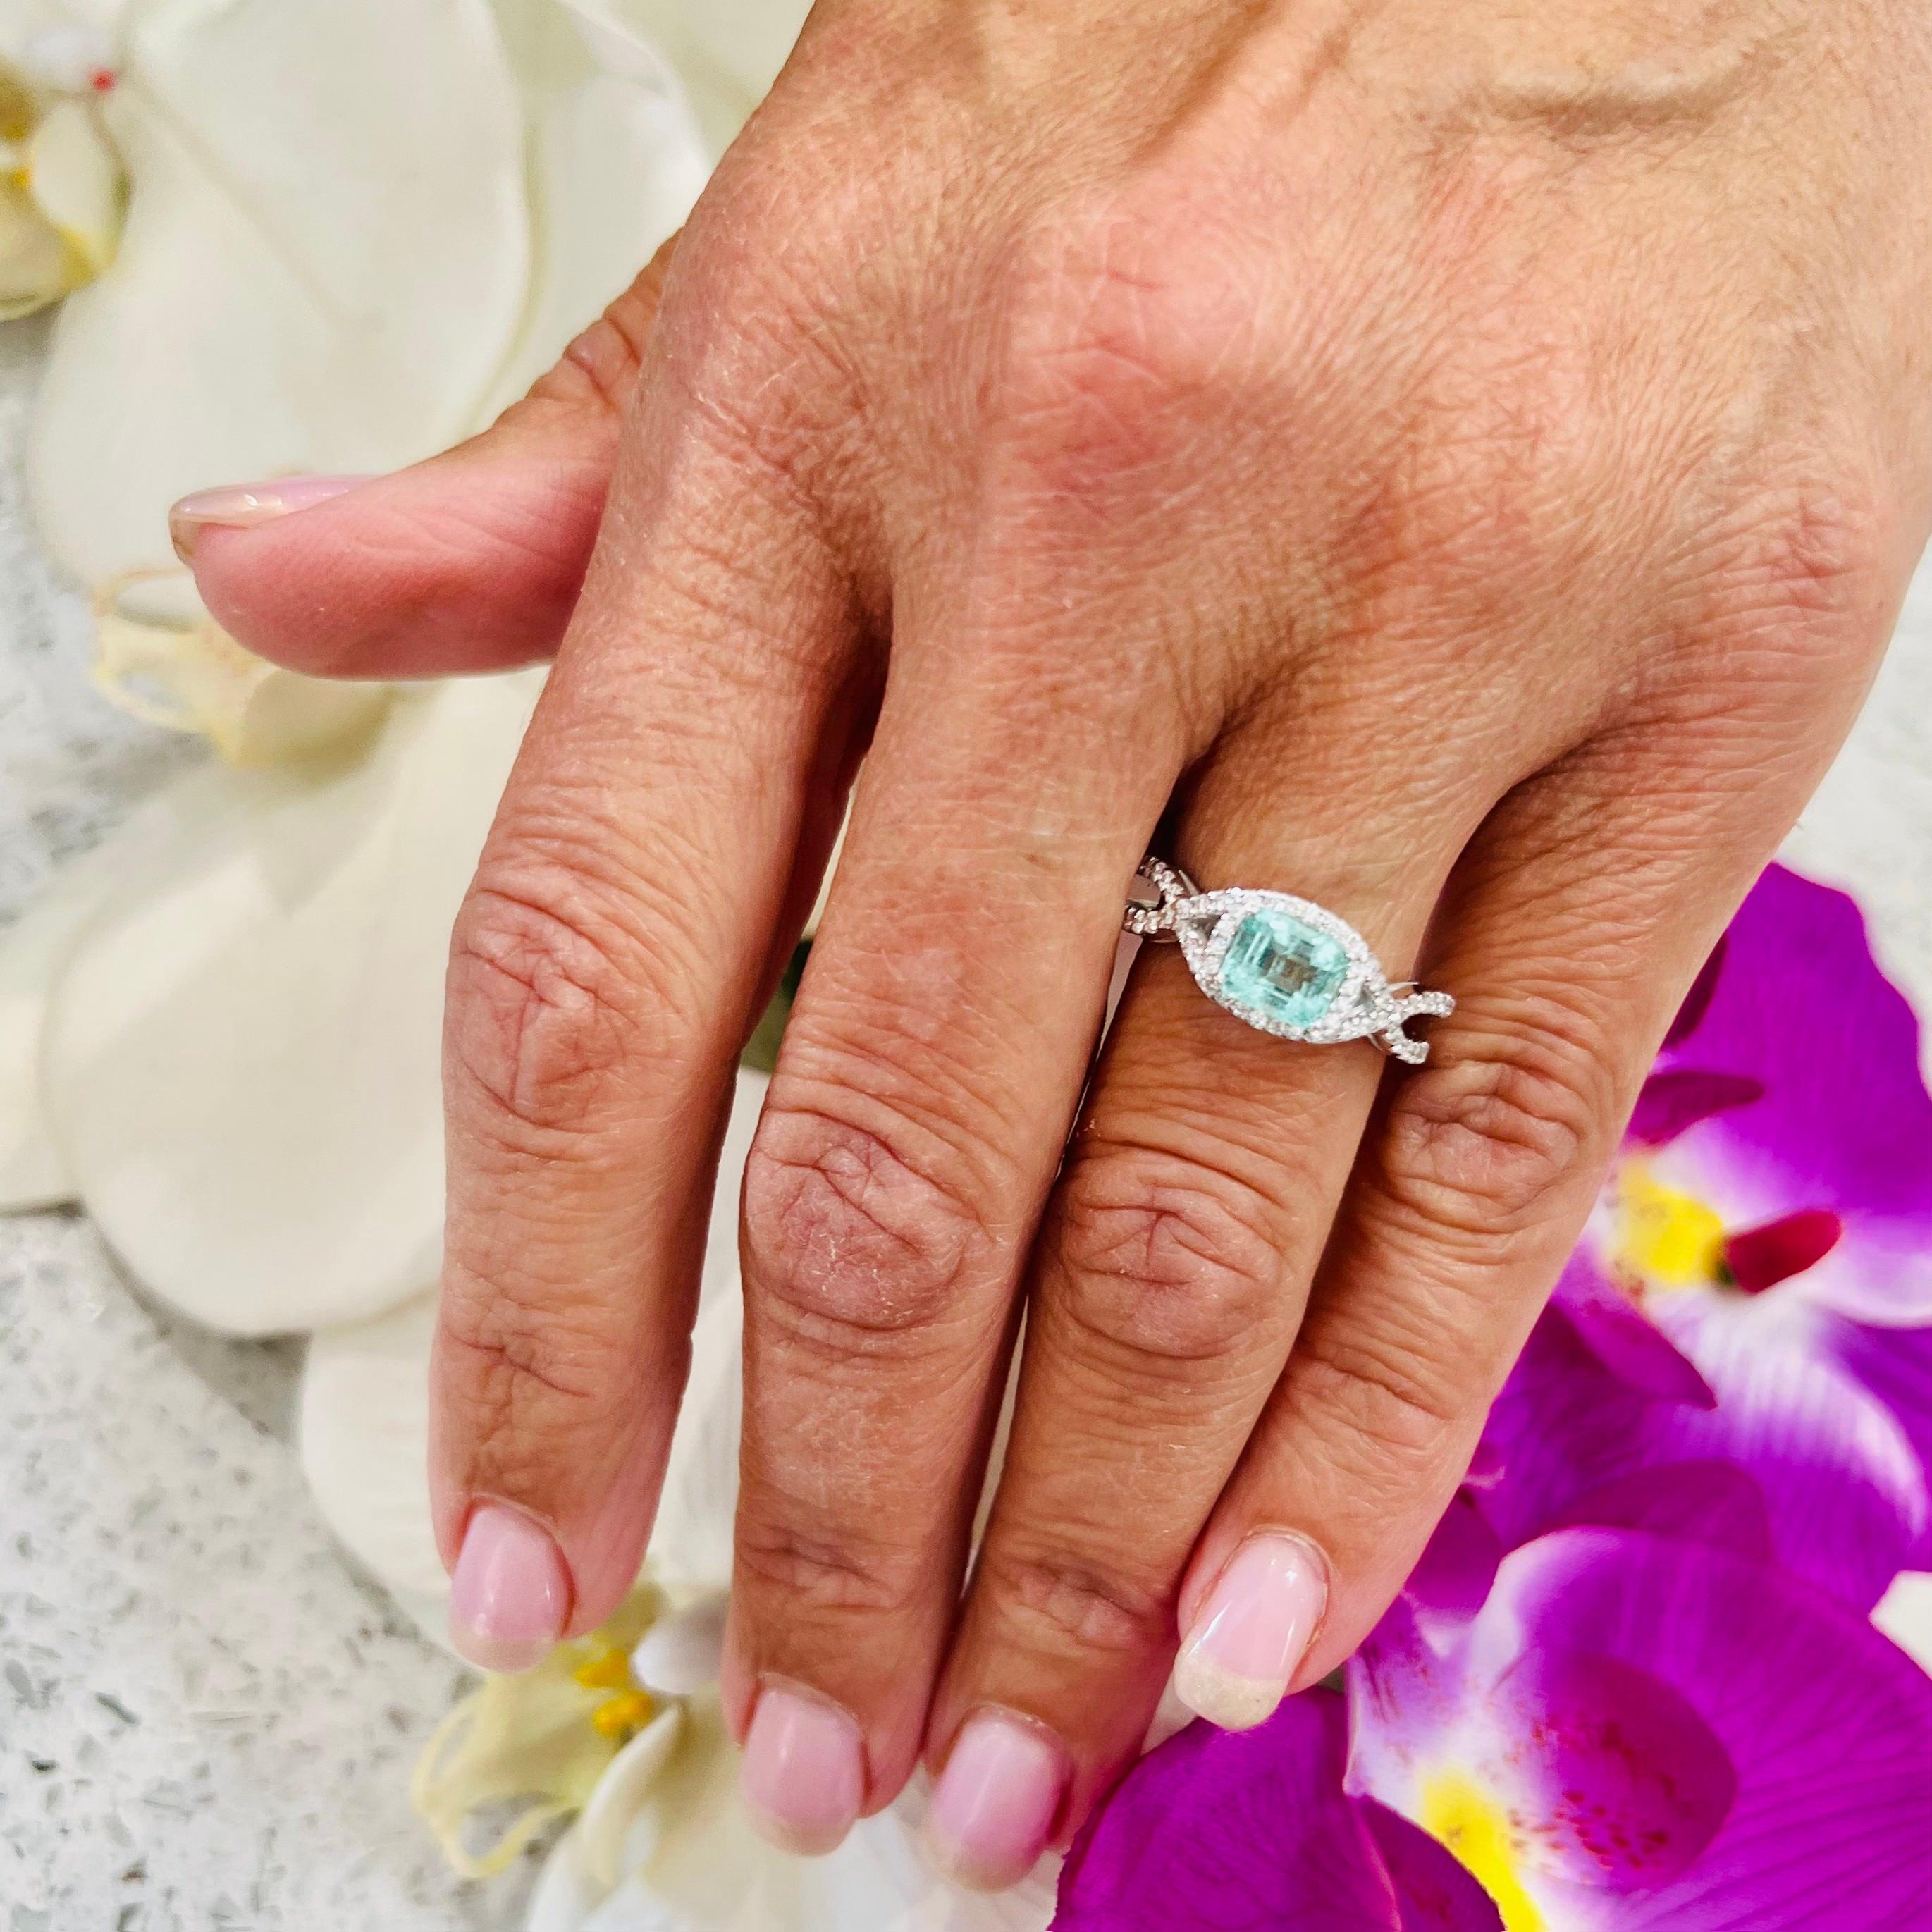 Natural Colombian Emerald Diamond Ring 6.5 14k W Gold 1.31 TCW Certified $4,750 216674

Nothing says, “I Love you” more than Diamonds and Pearls!

This Emerald ring has been Certified, Inspected, and Appraised by Gemological Appraisal